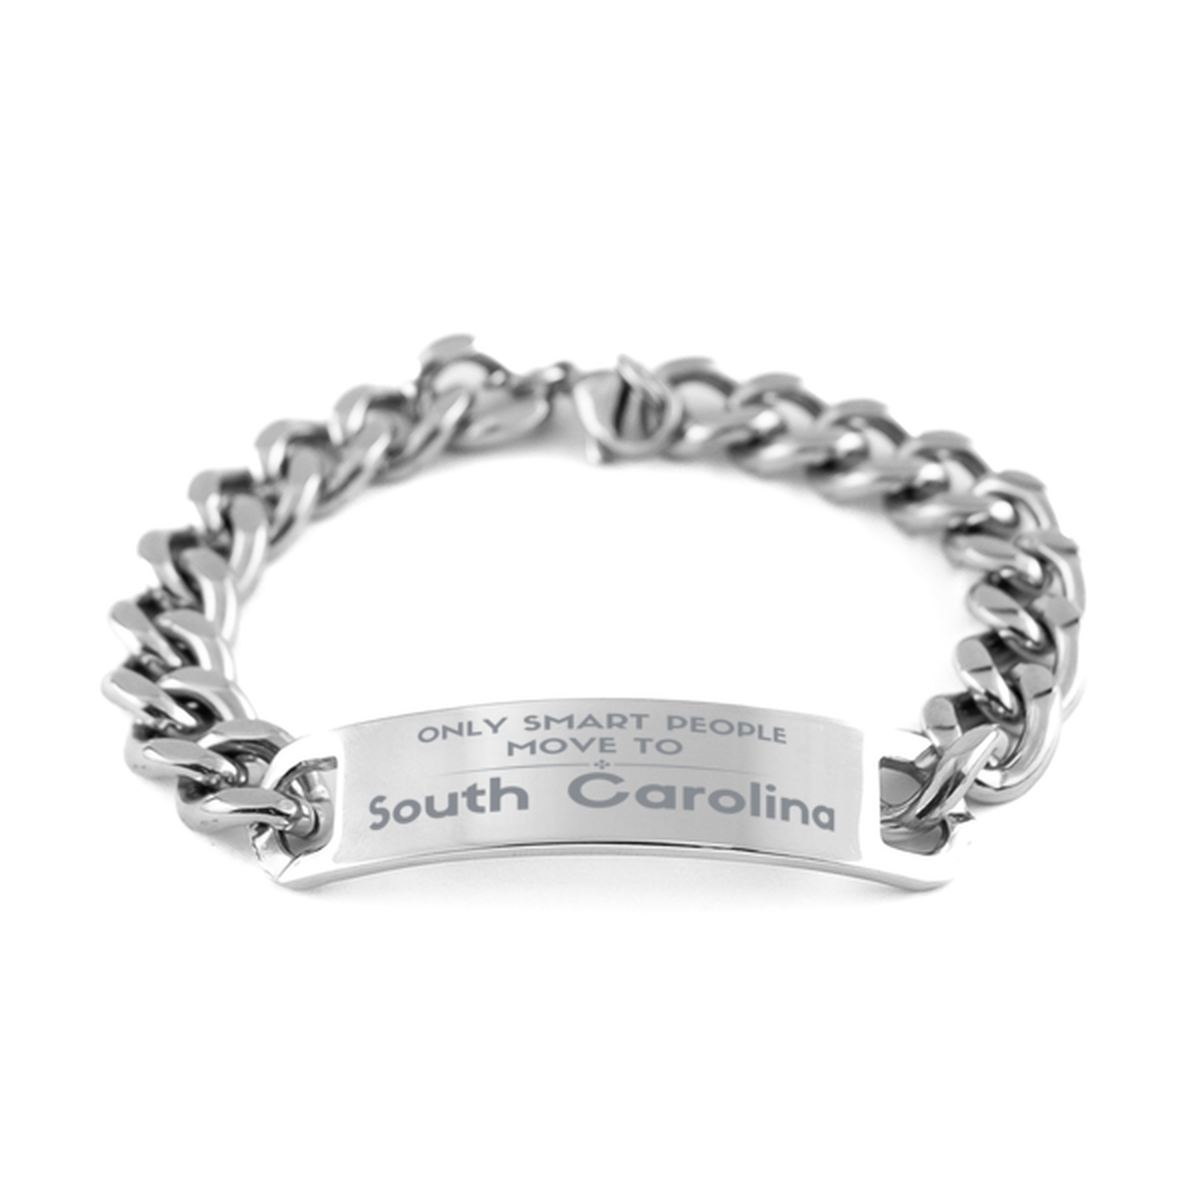 Only smart people move to South Carolina Cuban Chain Stainless Steel Bracelet, Gag Gifts For South Carolina, Move to South Carolina Gifts for Friends Coworker Funny Saying Quote